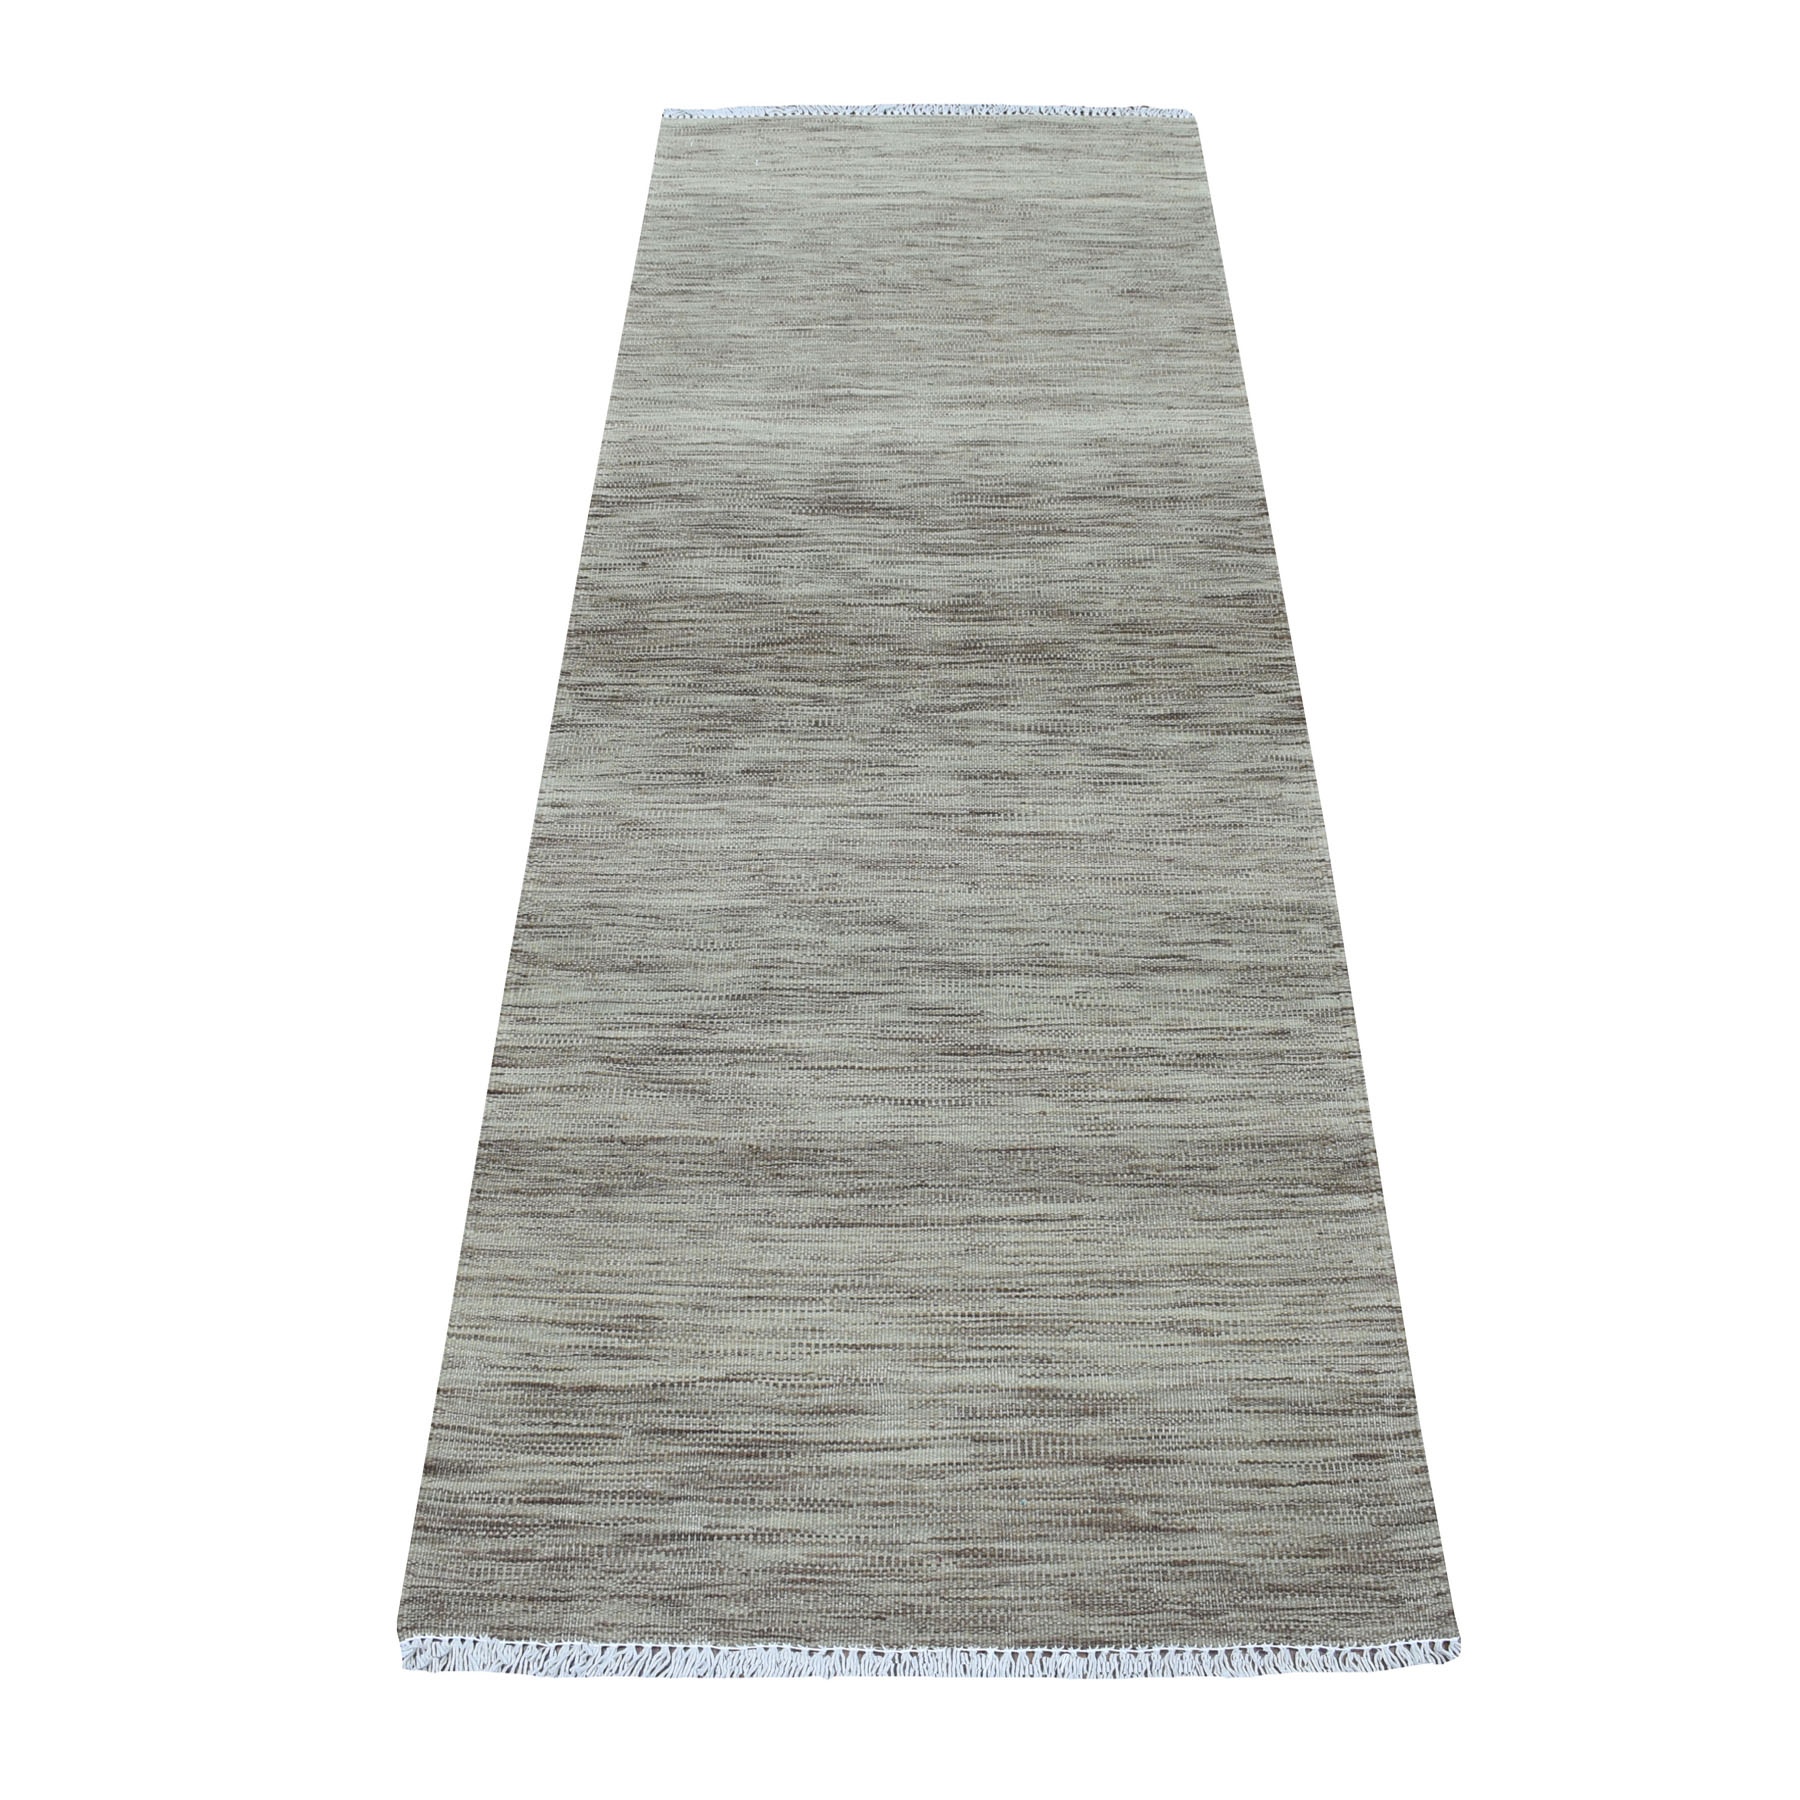 Modern & Contemporary Wool Hand-Woven Area Rug 2'4